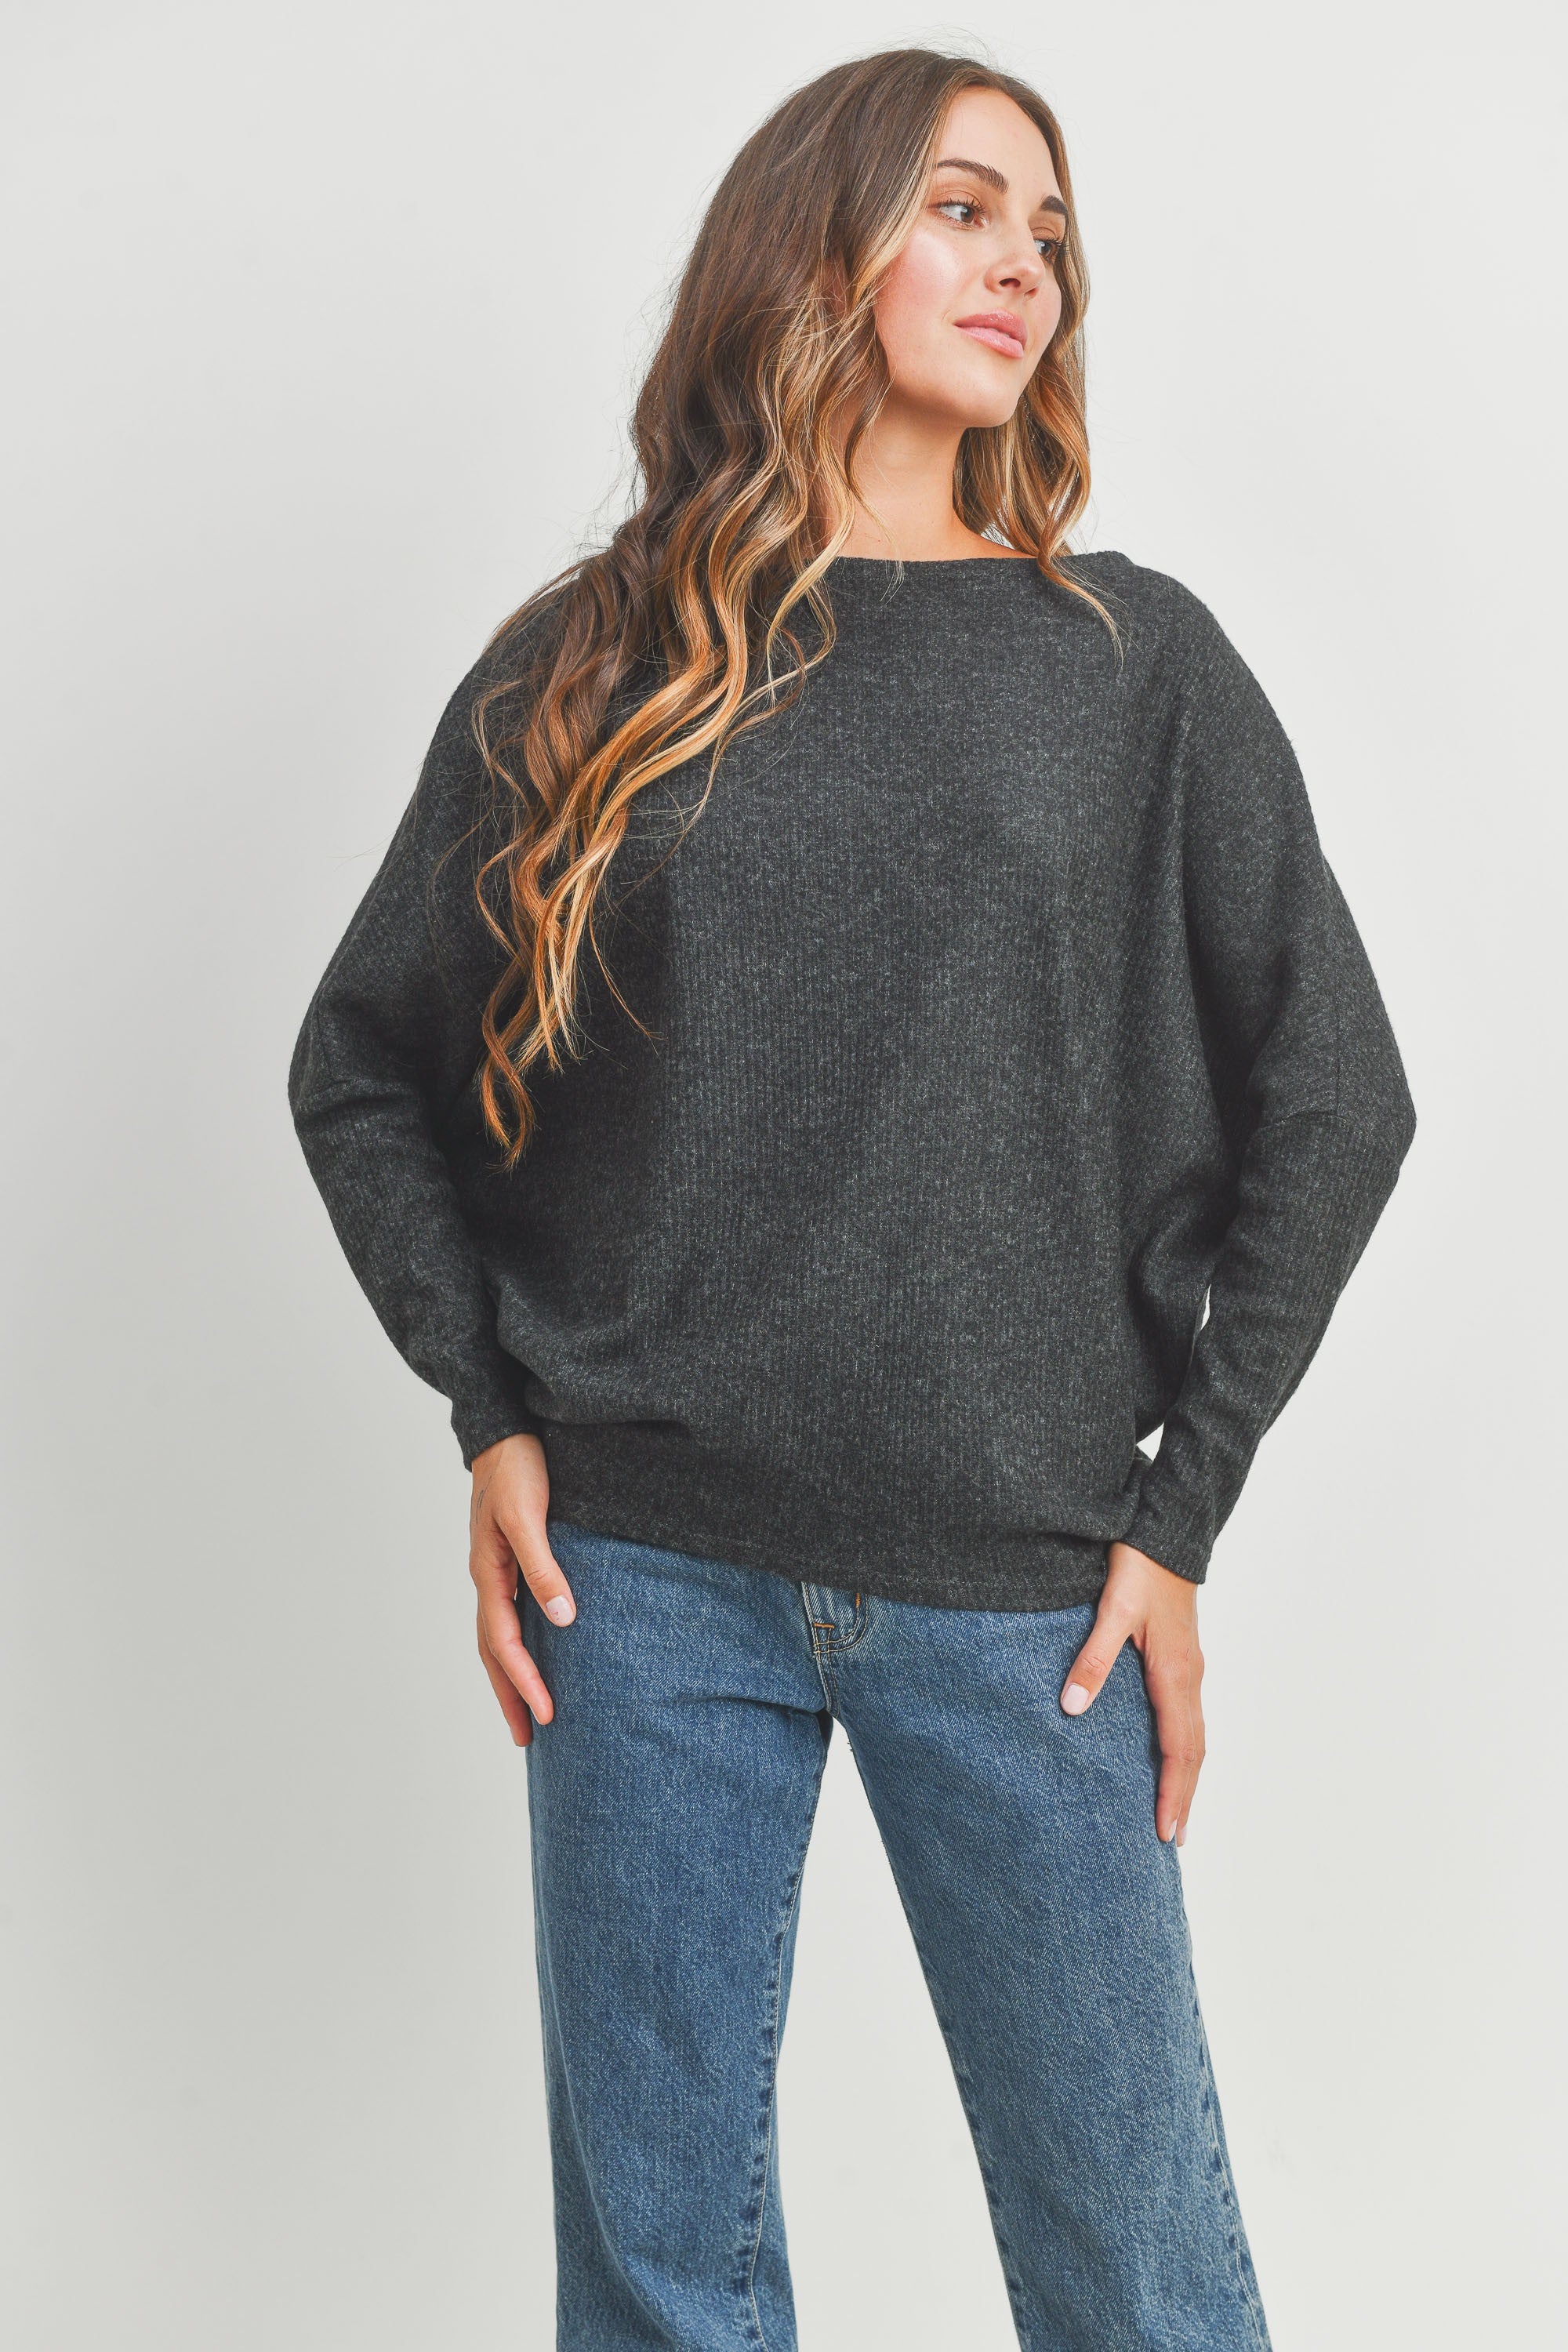 Ribbed High Low Knit Top - Charcoal